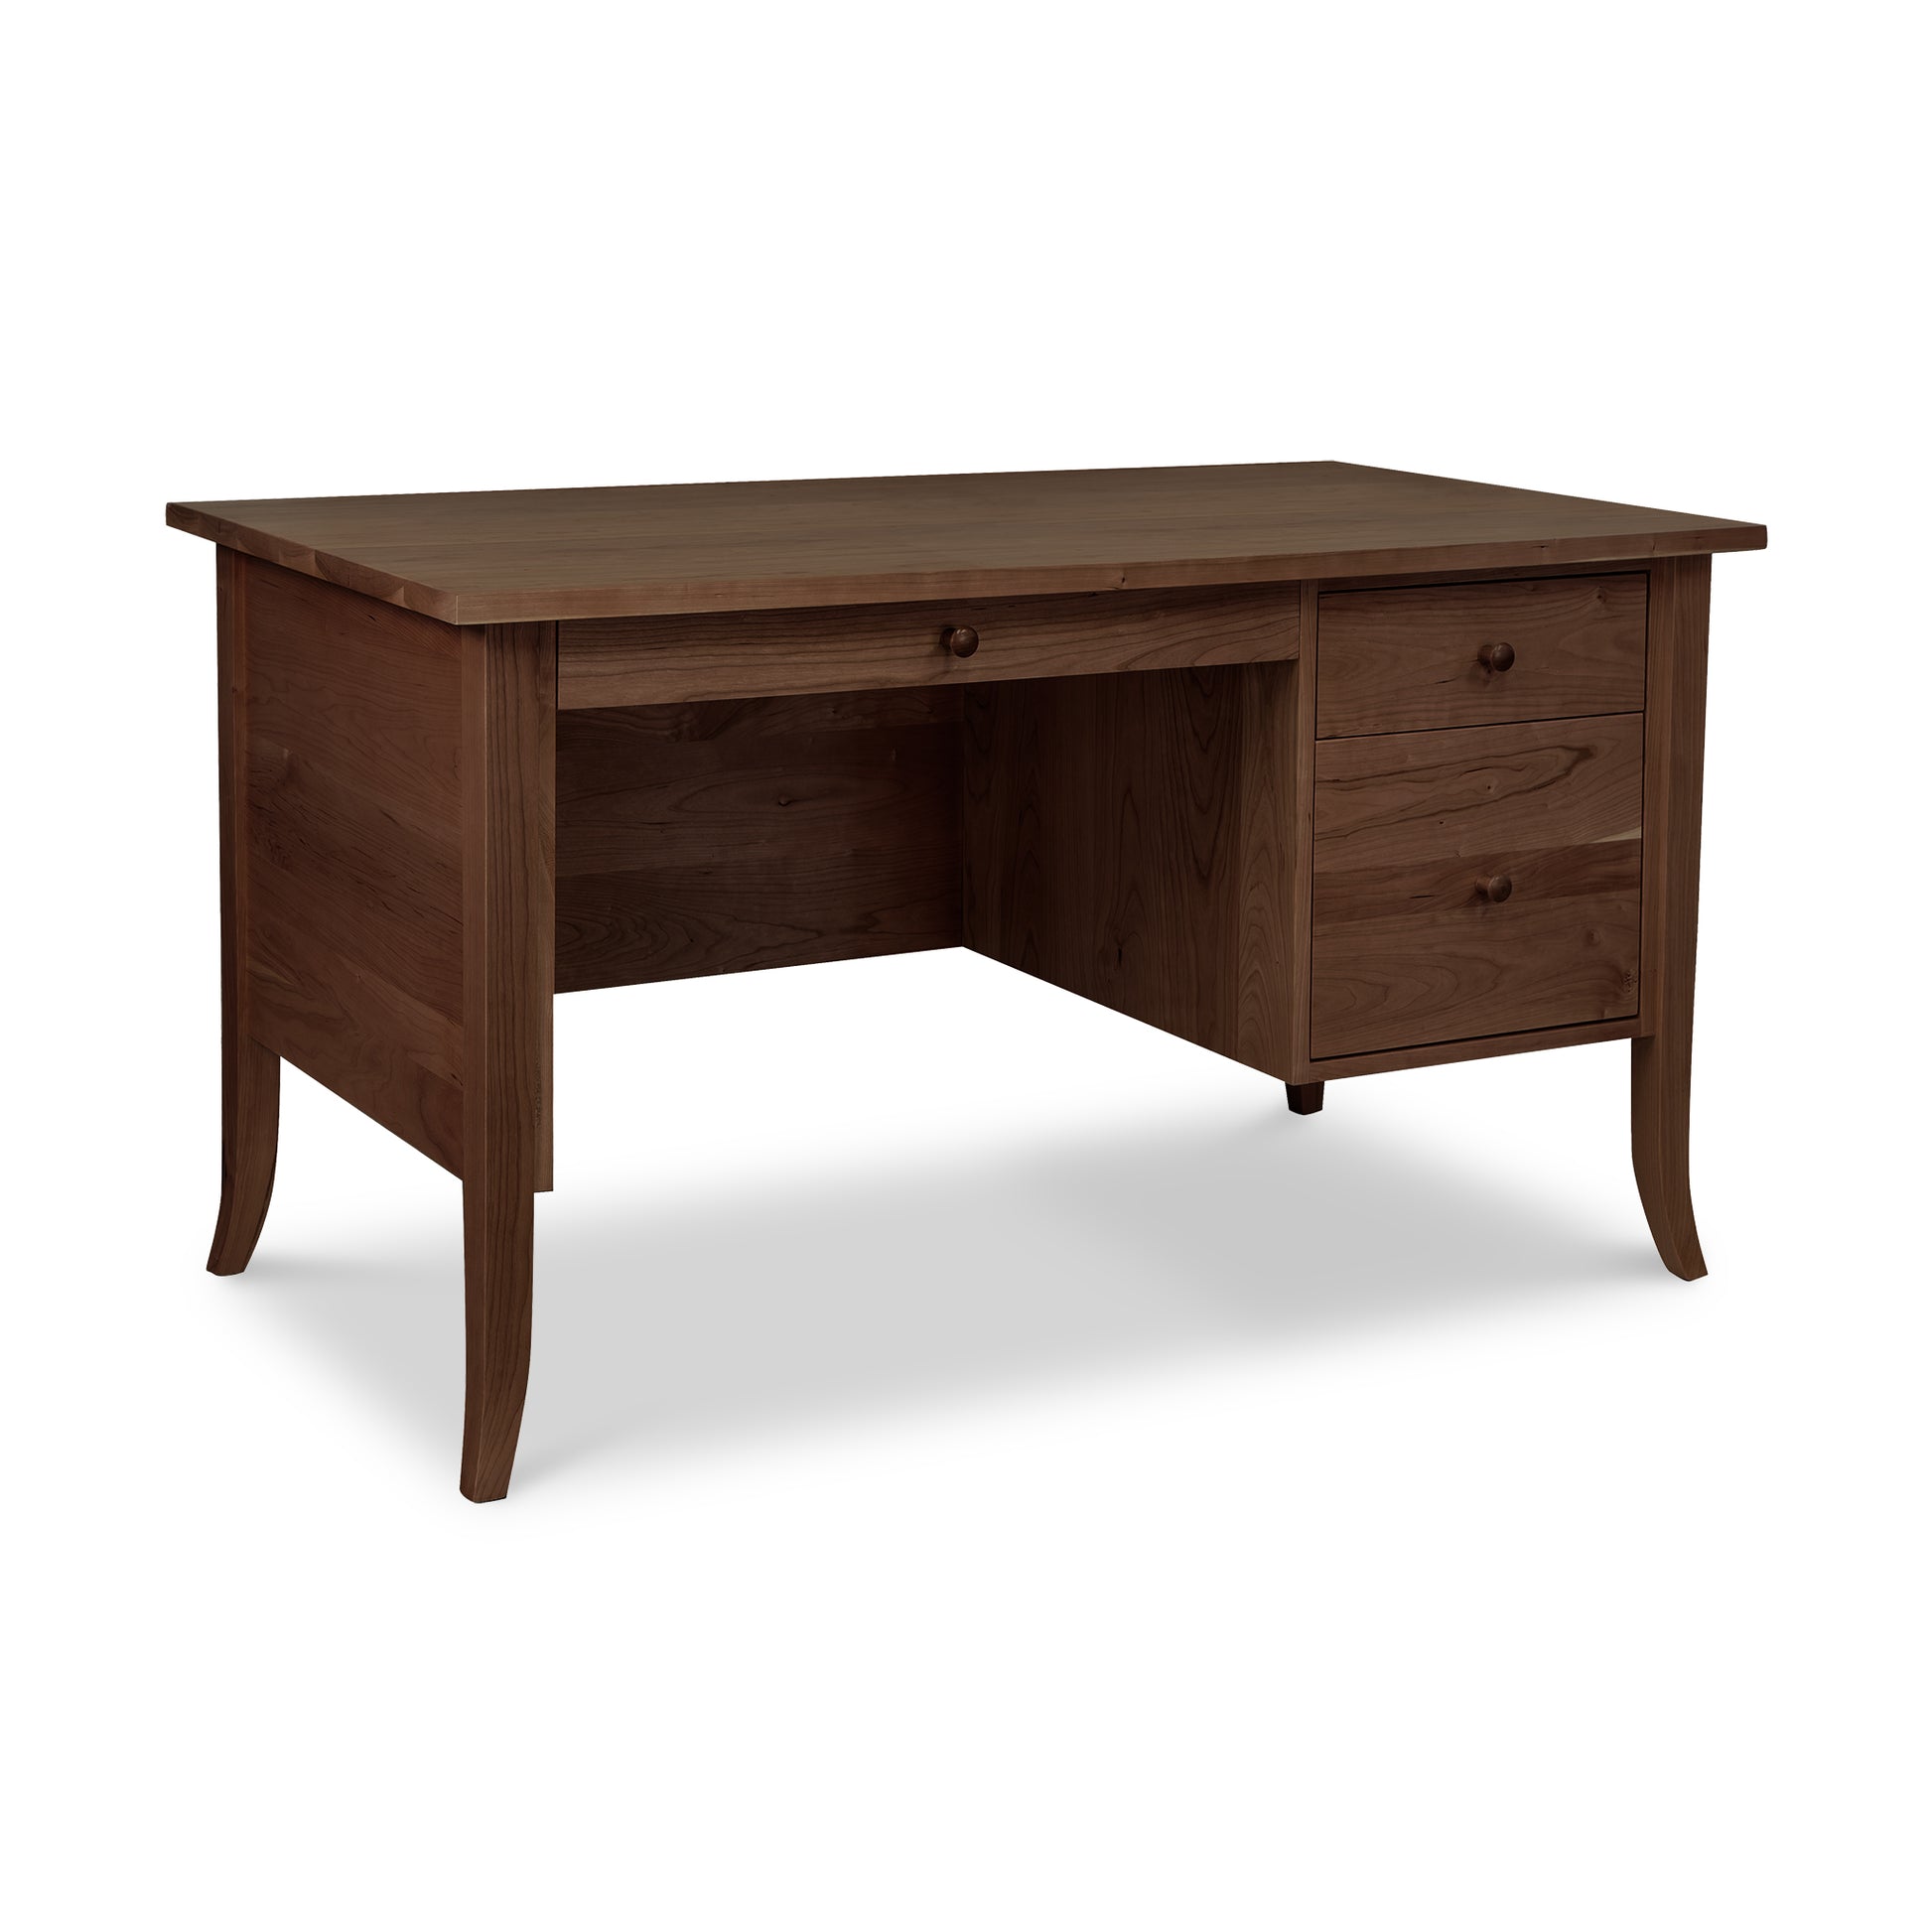 An image of a Small Wood Flare Leg Executive Desk with drawers by Lyndon Furniture.